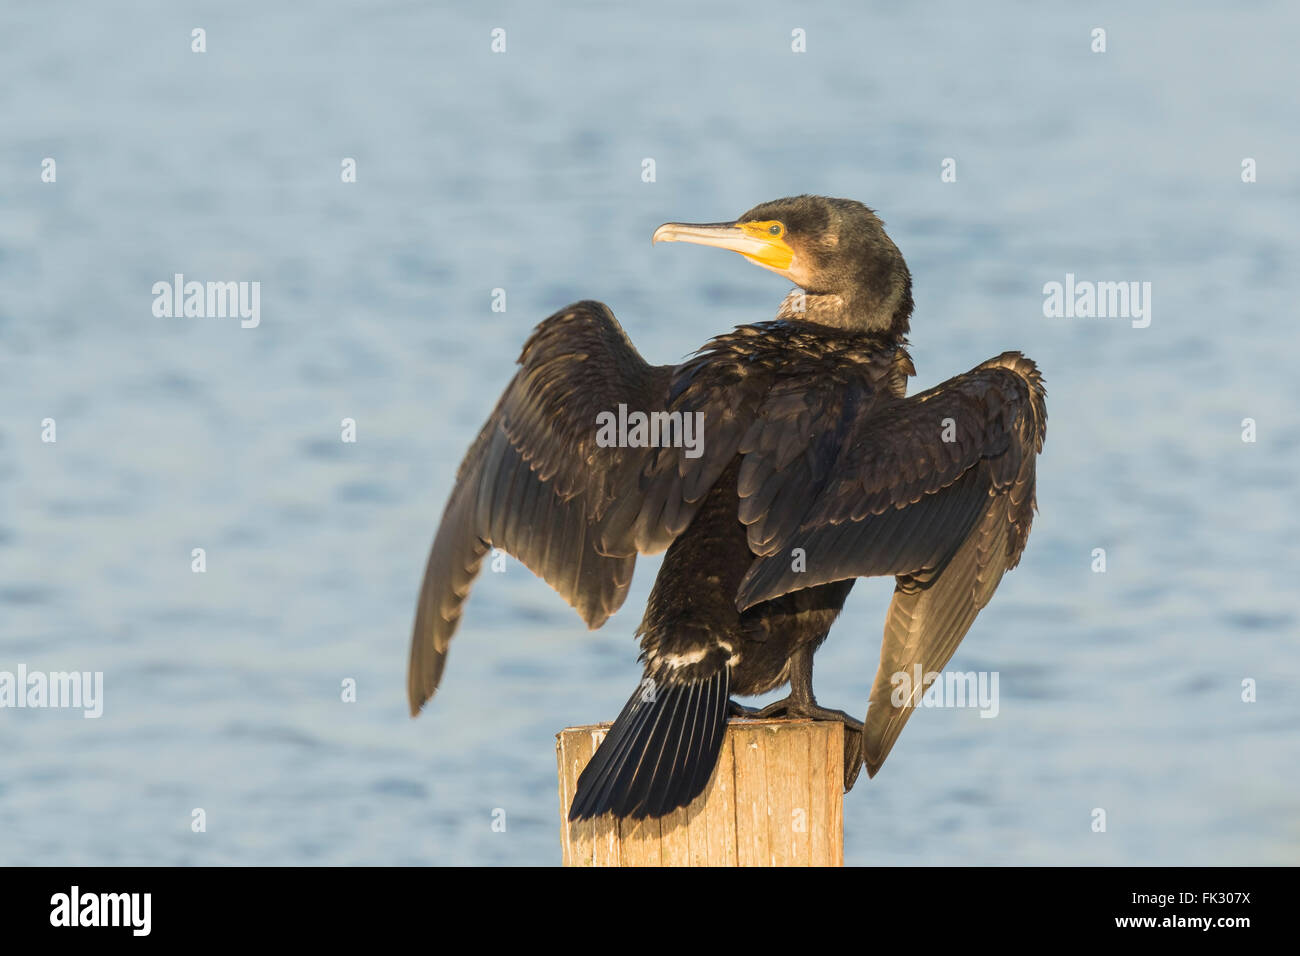 Black cormorant, Phalacrocorax carbo, lets its wings dry in the sun. This is characteristic behavior for a cormorant. Stock Photo